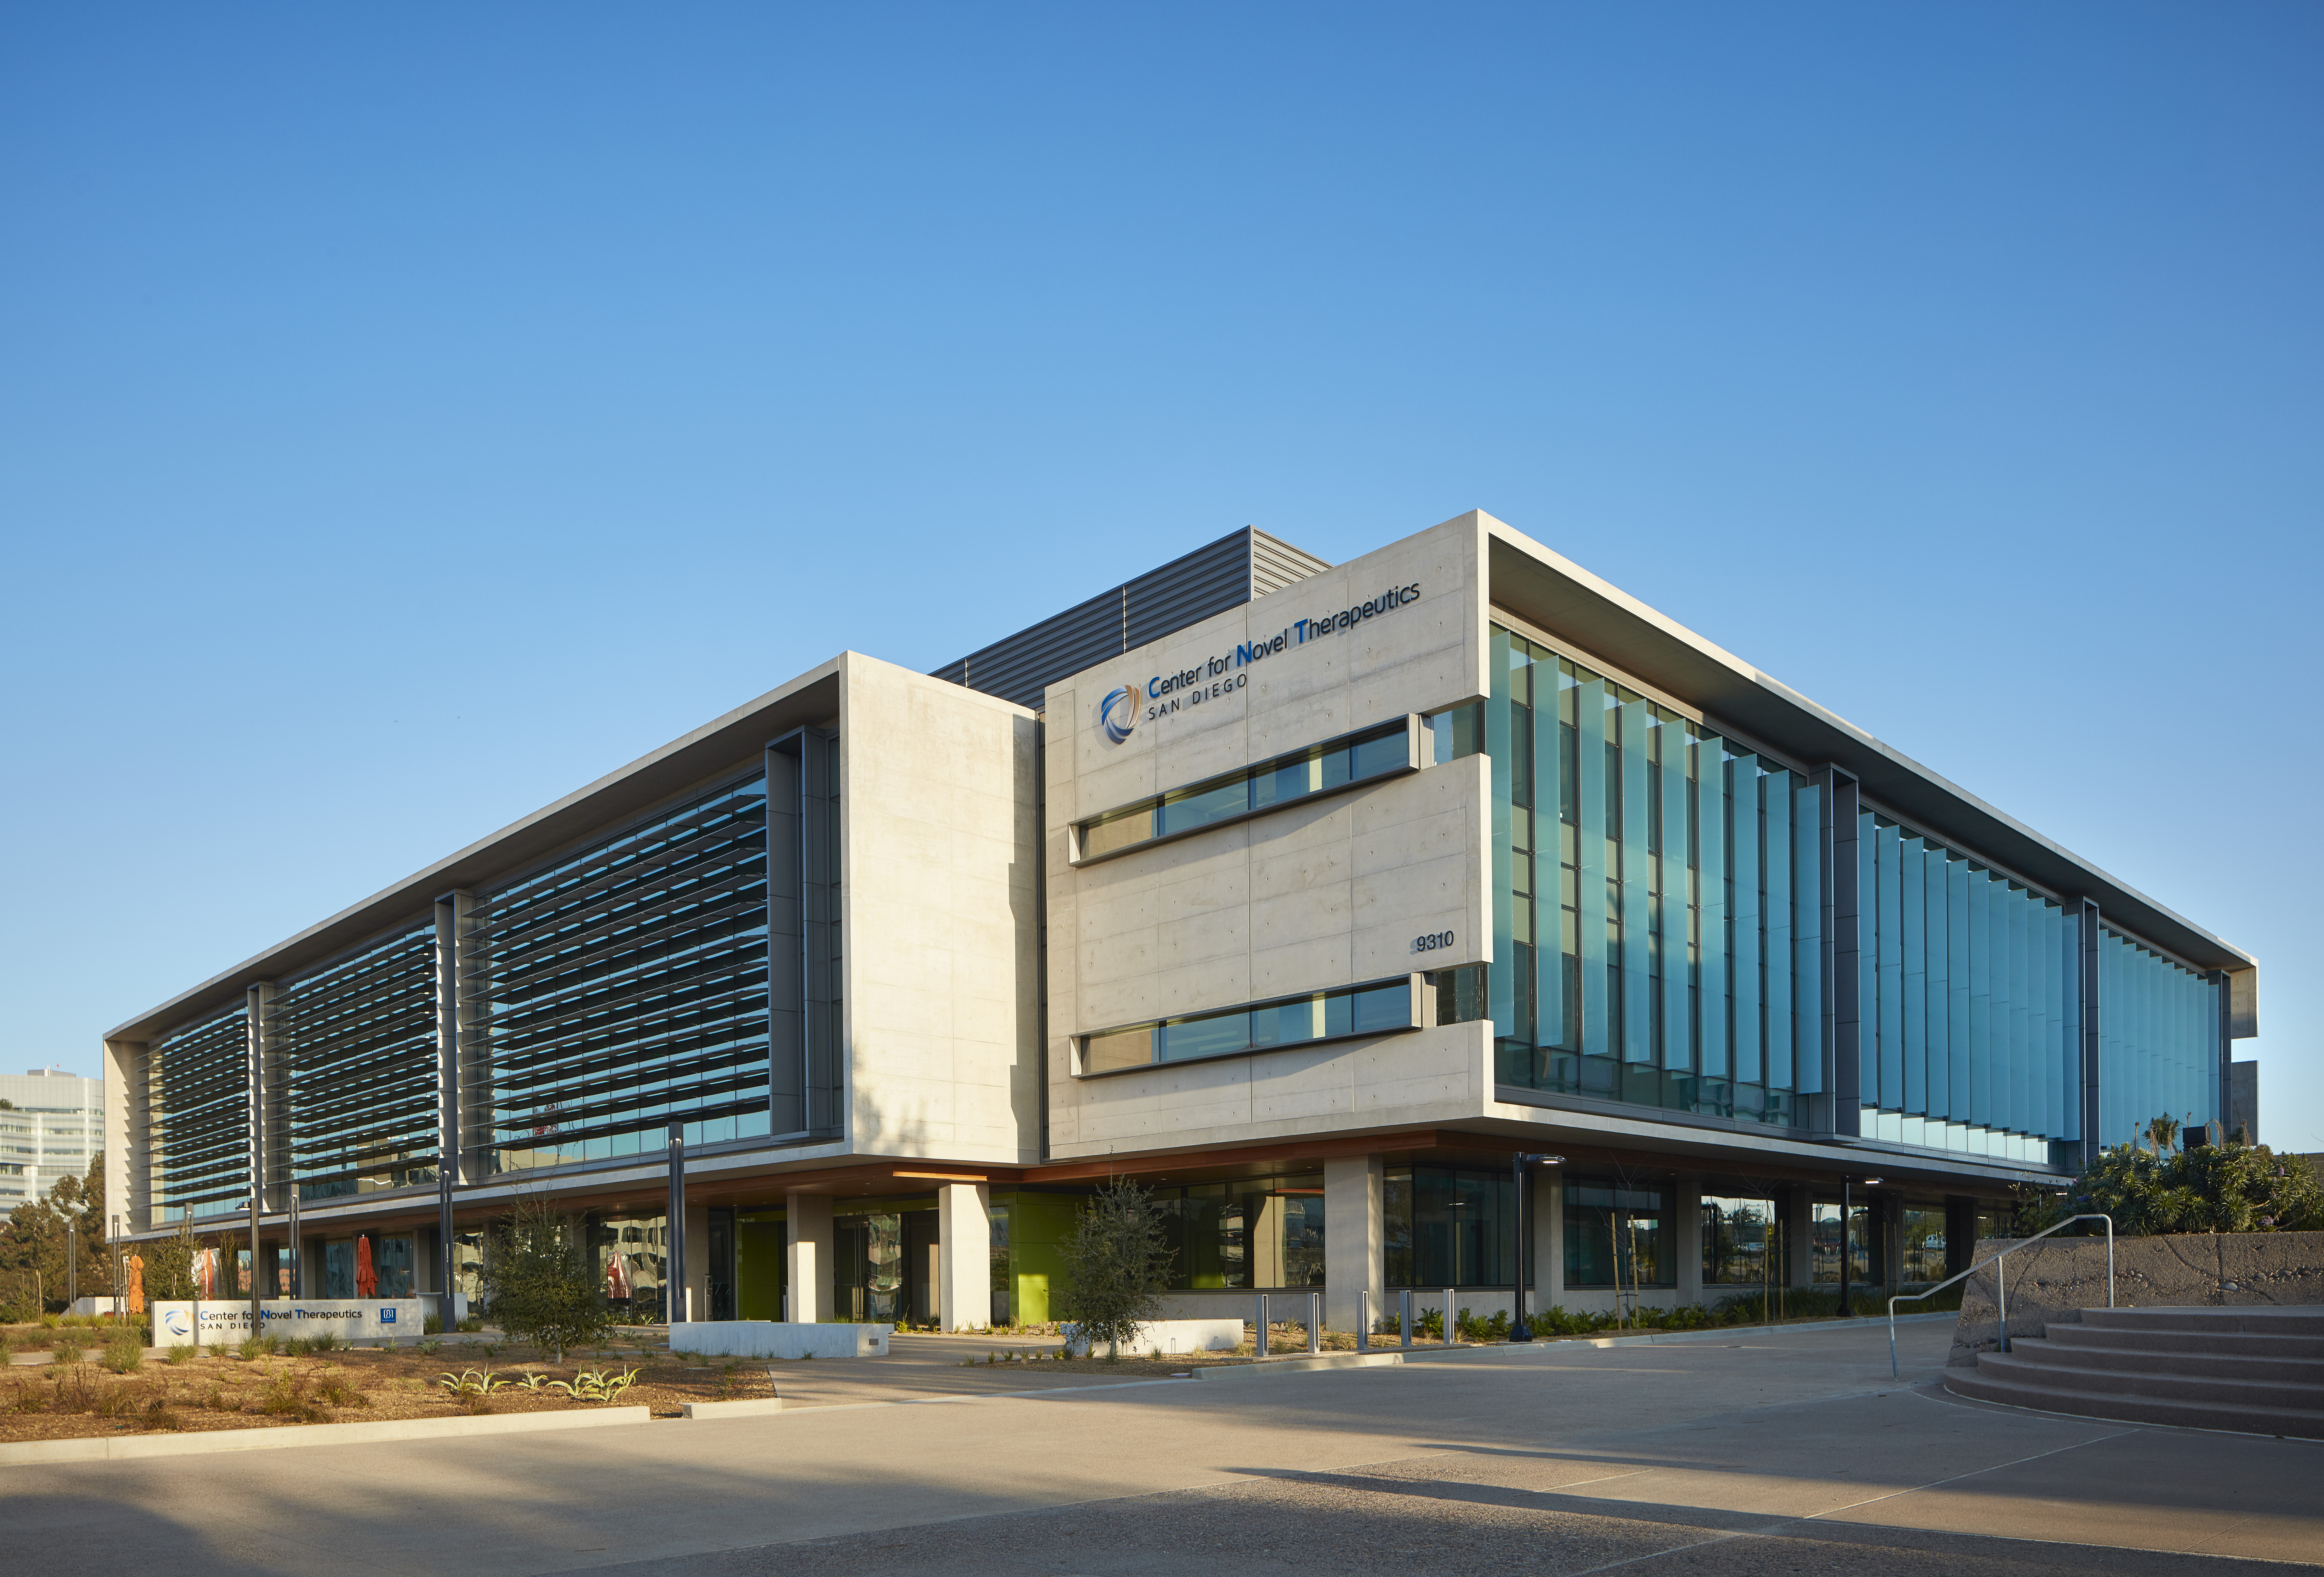 The Center for Novel Therapeutics